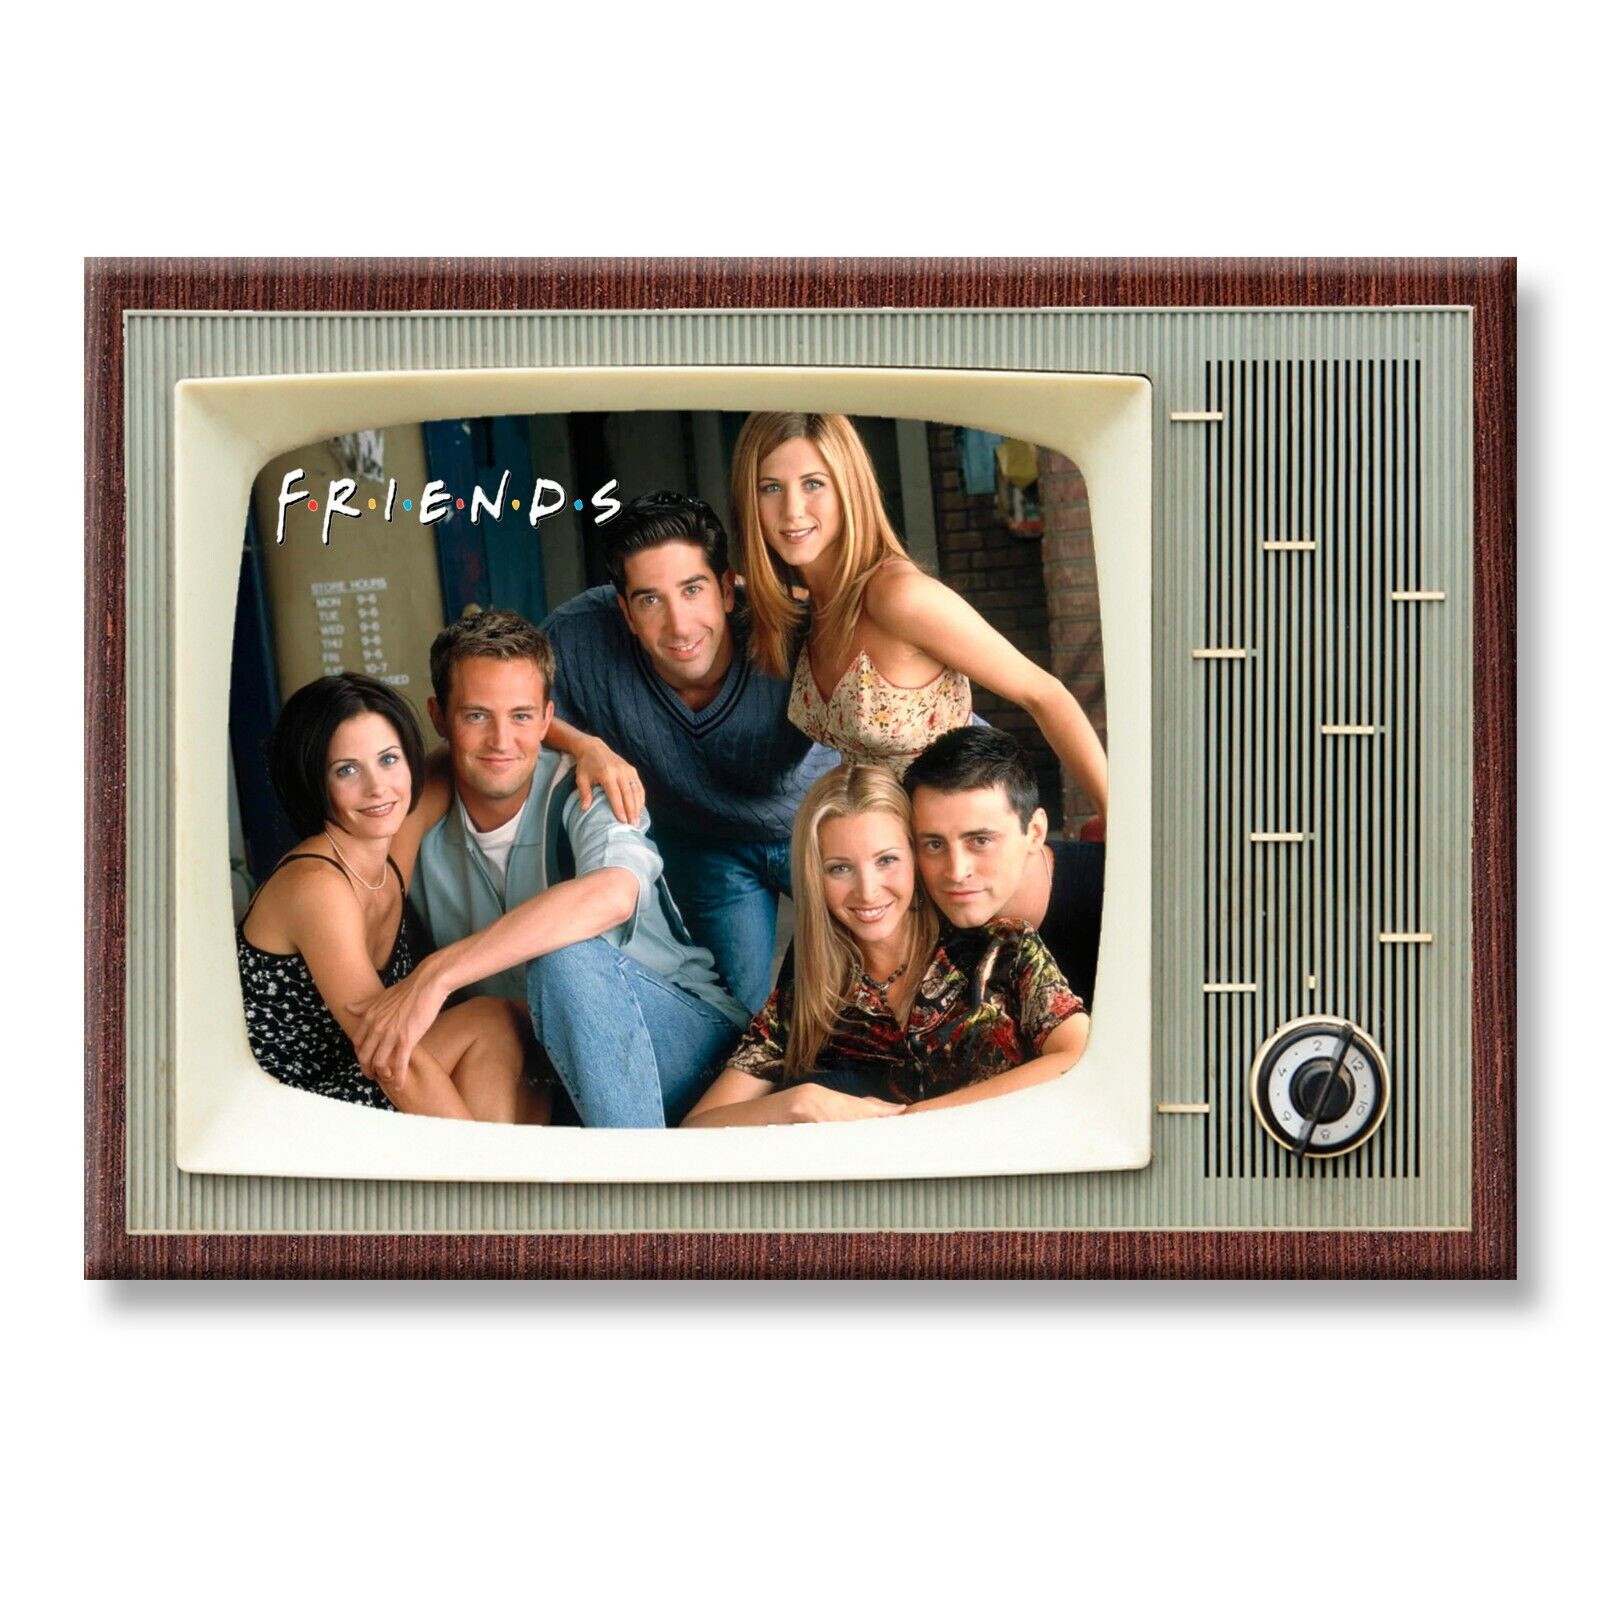 FRIENDS TV Show Classic TV 3.5 inches x 2.5 inches Steel FRIDGE MAGNET